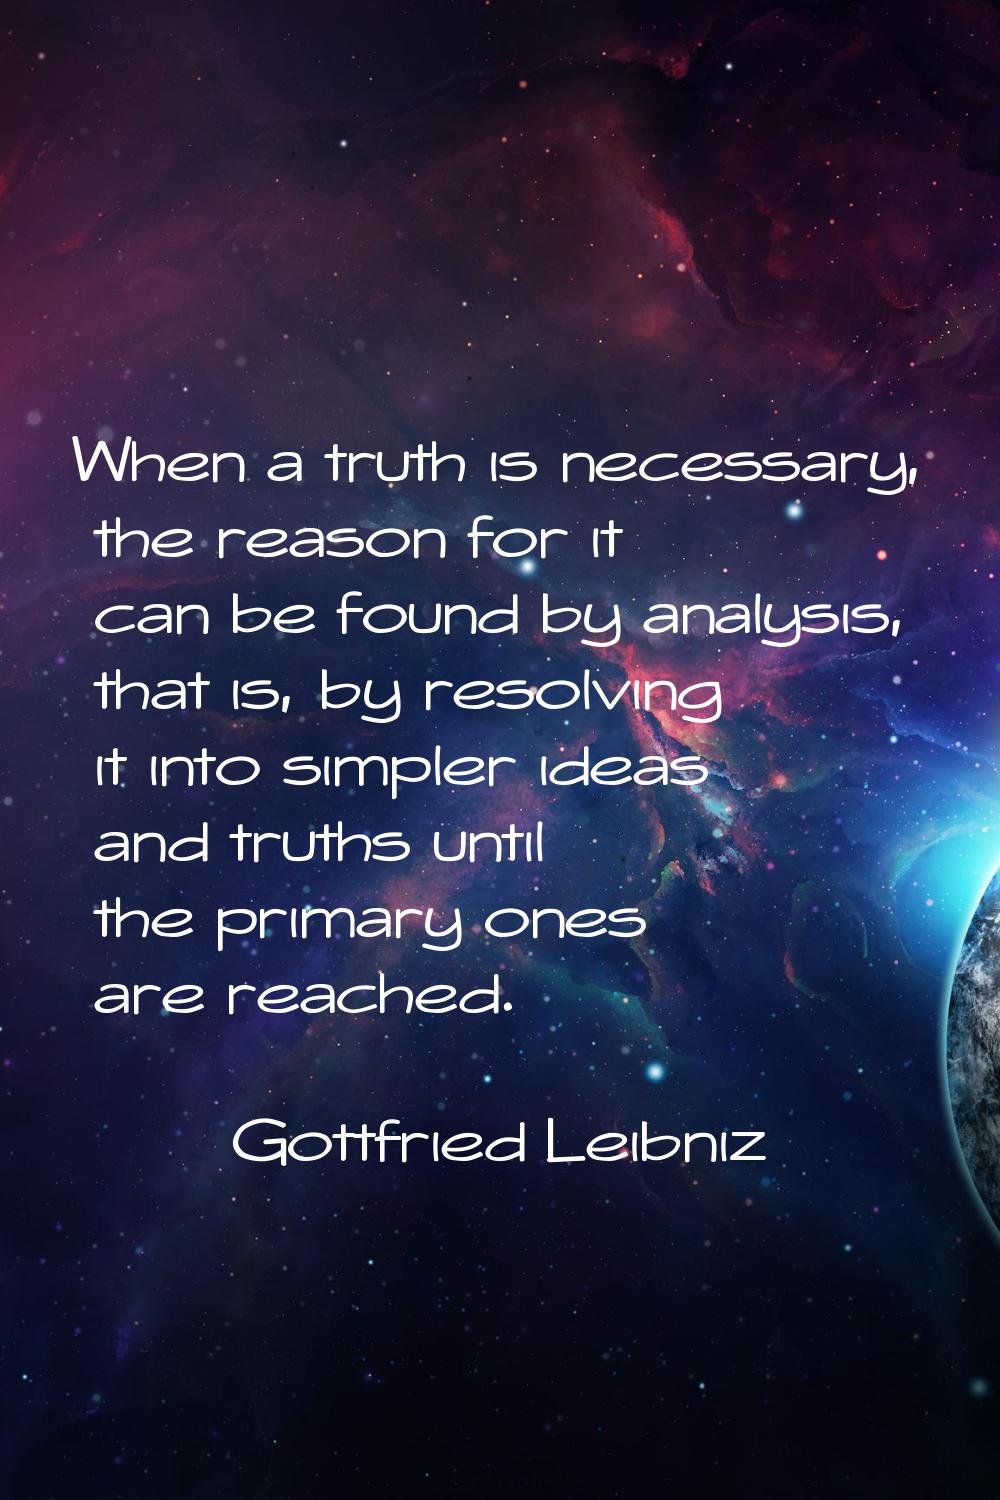 When a truth is necessary, the reason for it can be found by analysis, that is, by resolving it int